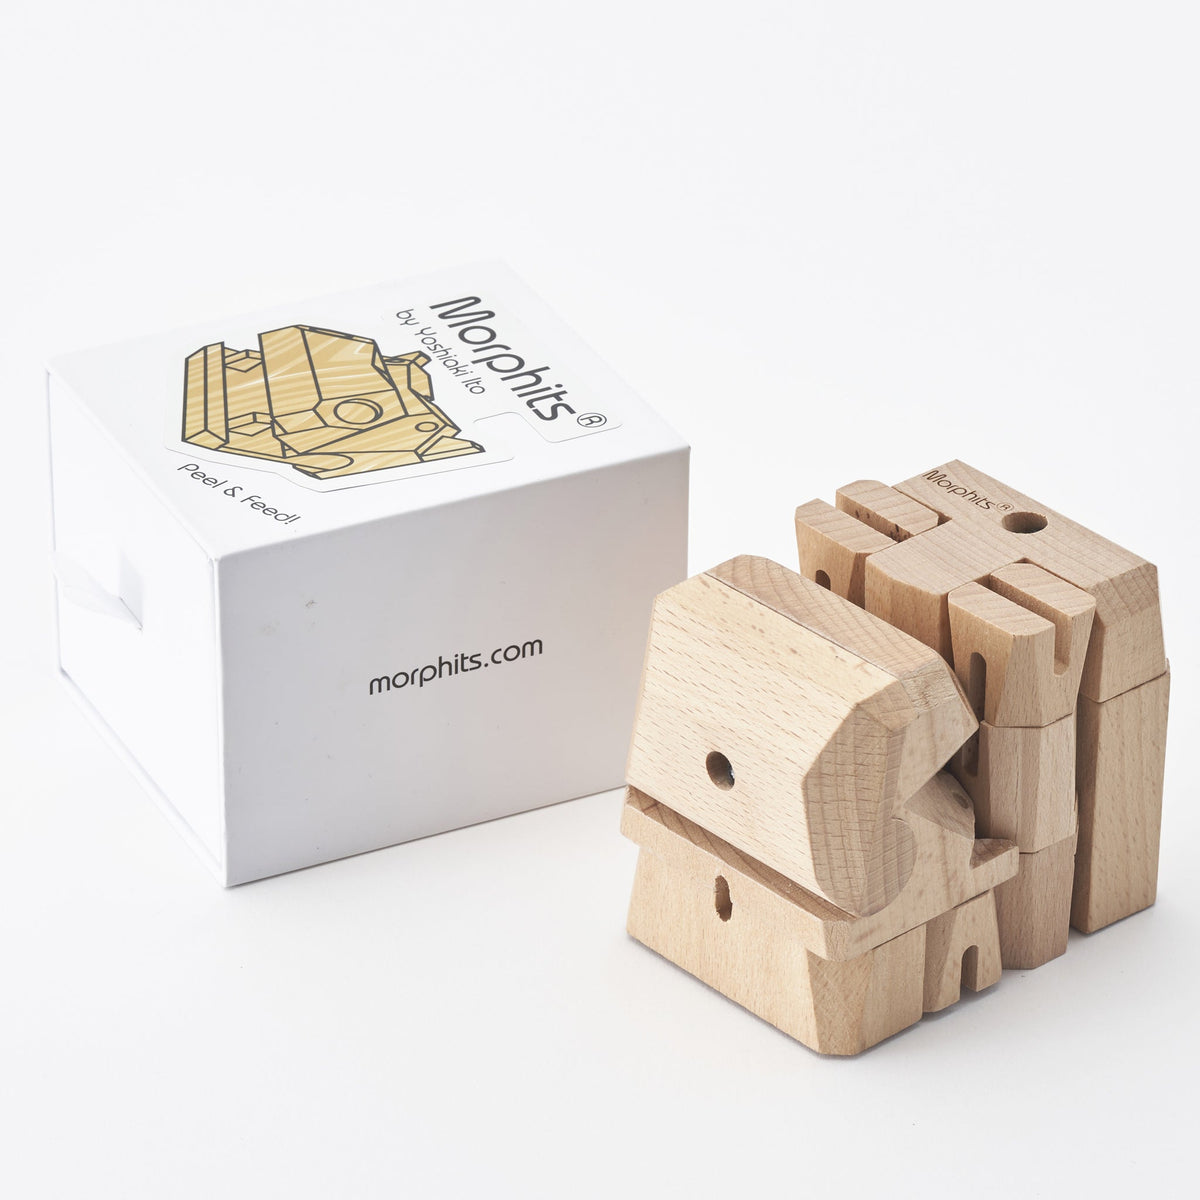 Morphits ® Hippo Wooden Toy: Explore the Wild with Poseable Wooden Playset Friends - Yoshiaki Ito Design Cuboid N1